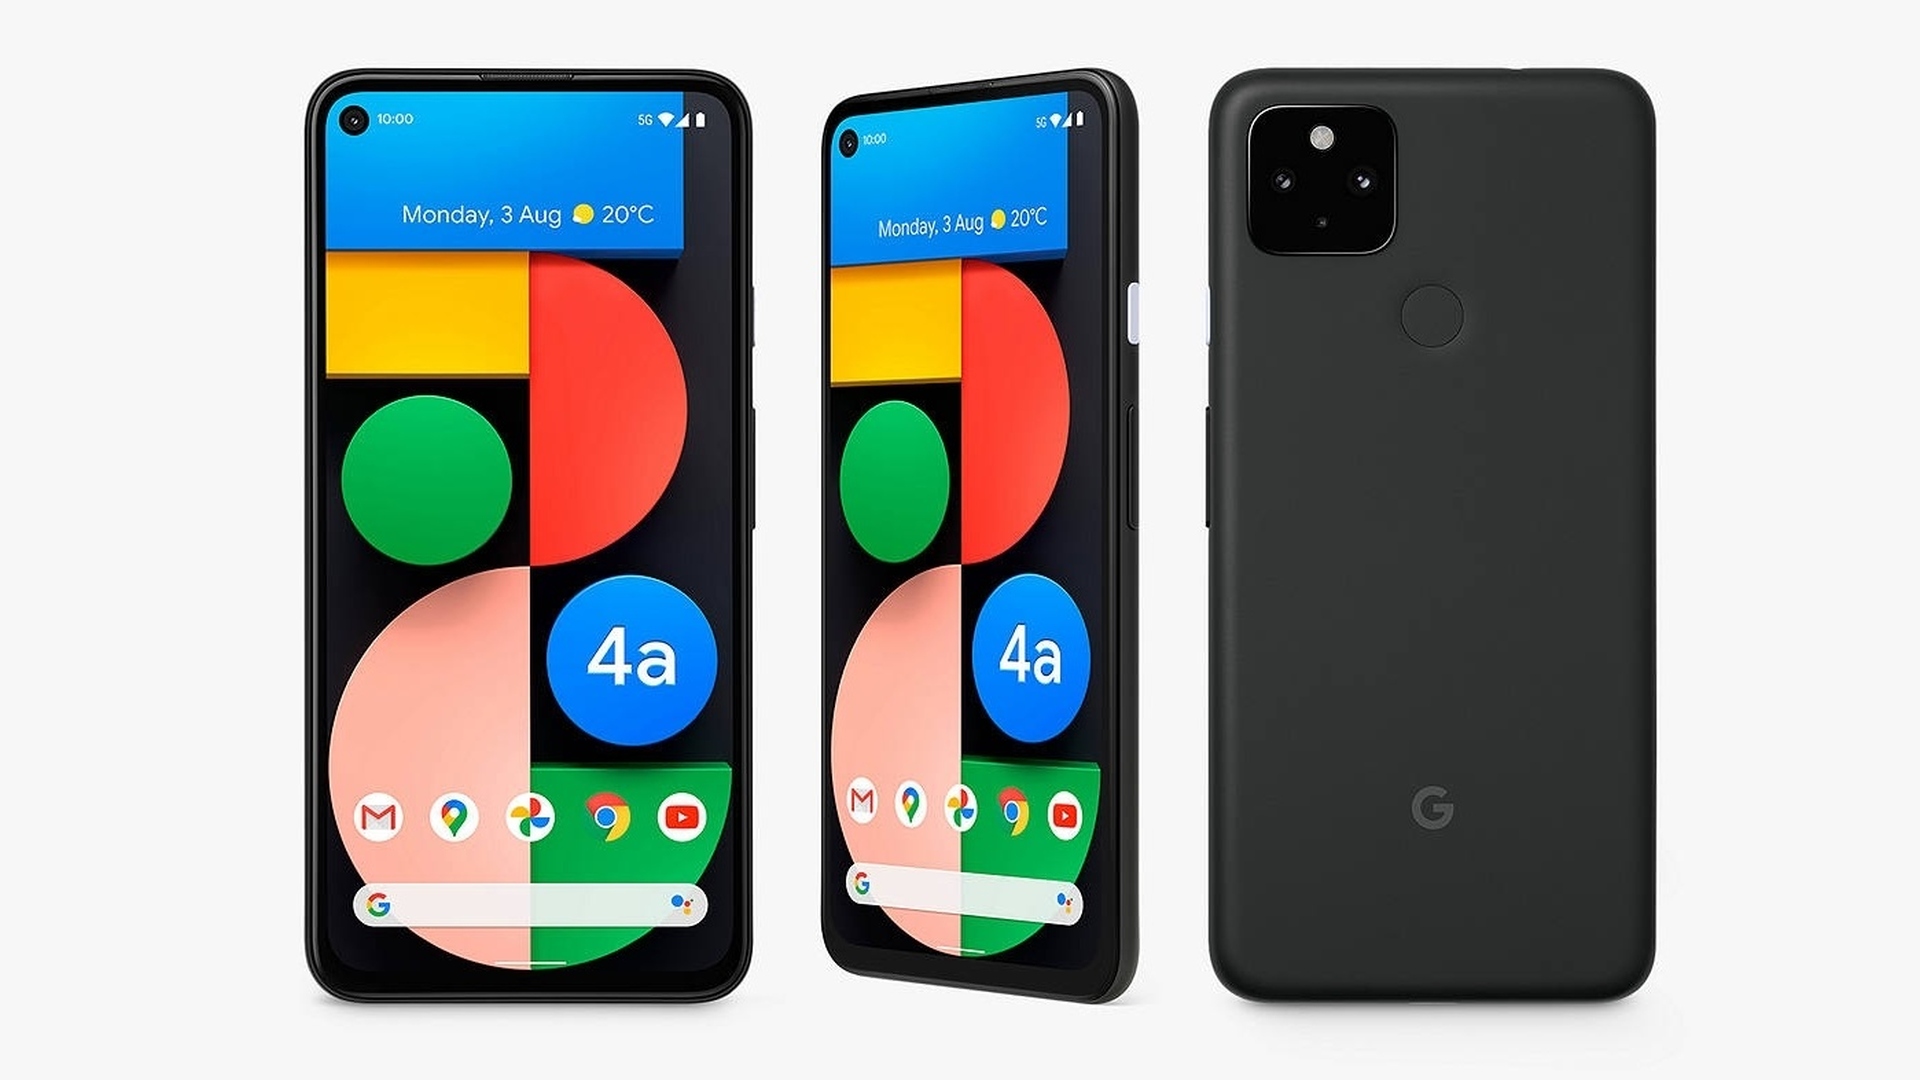 This might be our best look yet of the Google Pixel 4a 5G